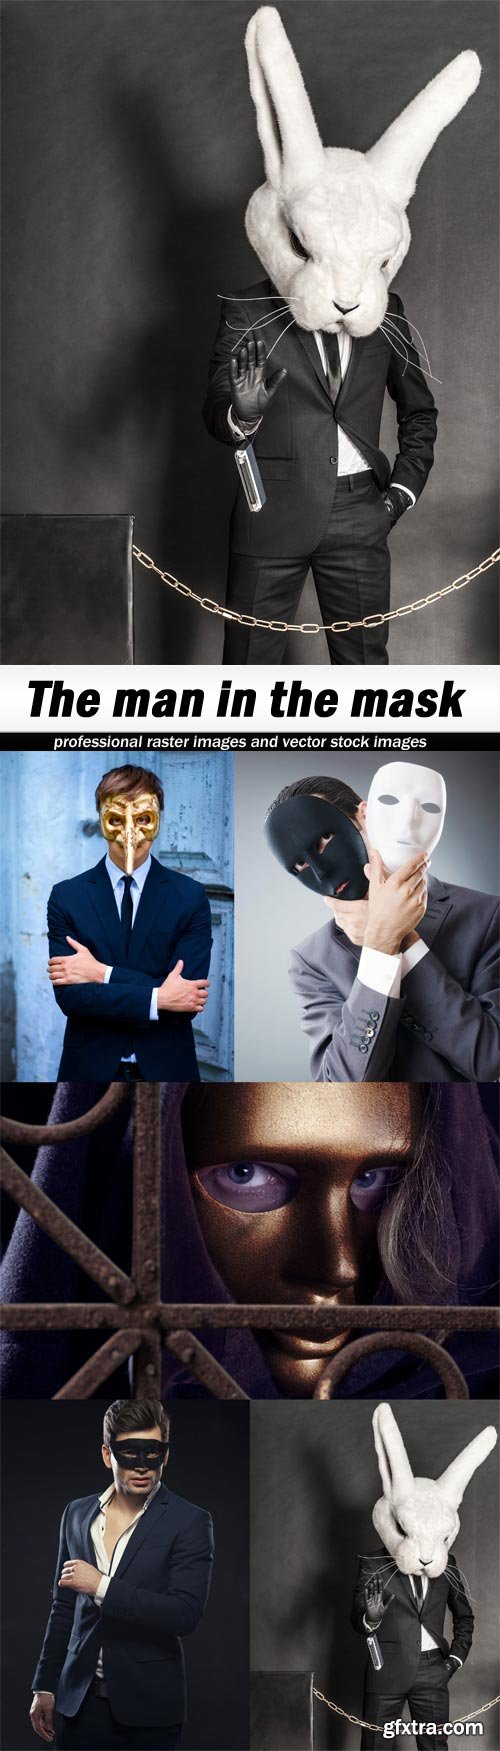 The man in the mask